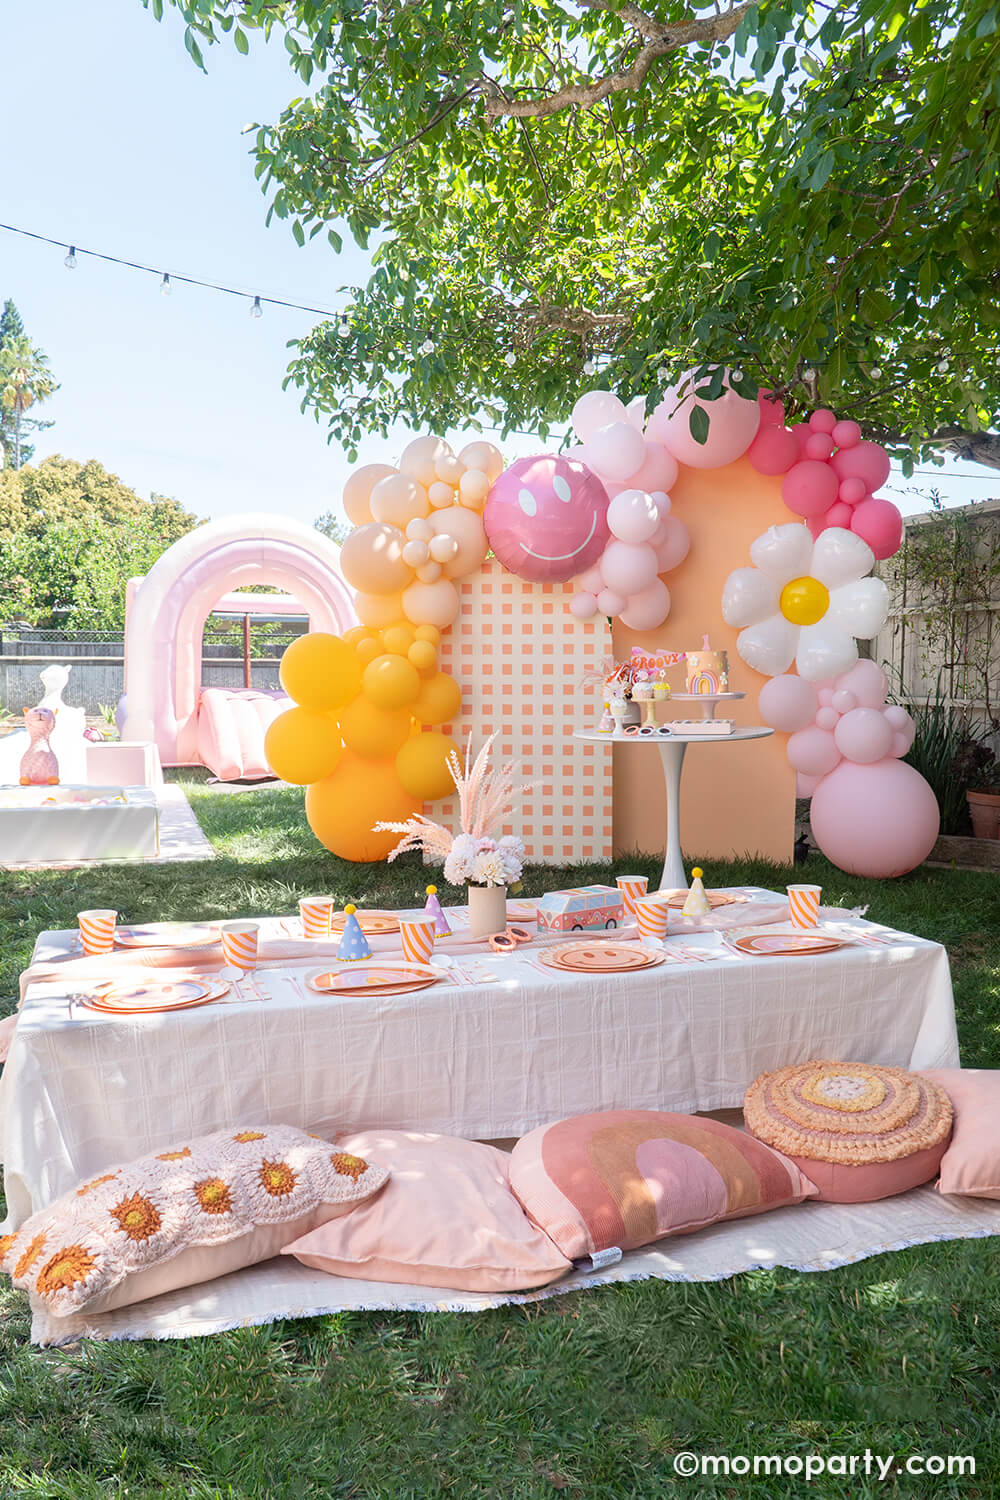 Momo Party One Groovy Baby First Birthday Party, with a birthday girl wearing a Retro Daisy Party Hat, sitting in the hair chair, eating her smash cake with a check patterned wooden Backdrop board, 30" Rosy Smiley face foil balloon by Tuftex Balloons, latex balloon decorations in peach, pink, Goldenrod colors. This decoration is such a stand out backdrop and photo booth for a Groovy birthday parties, baby showers, and most any other joyful event